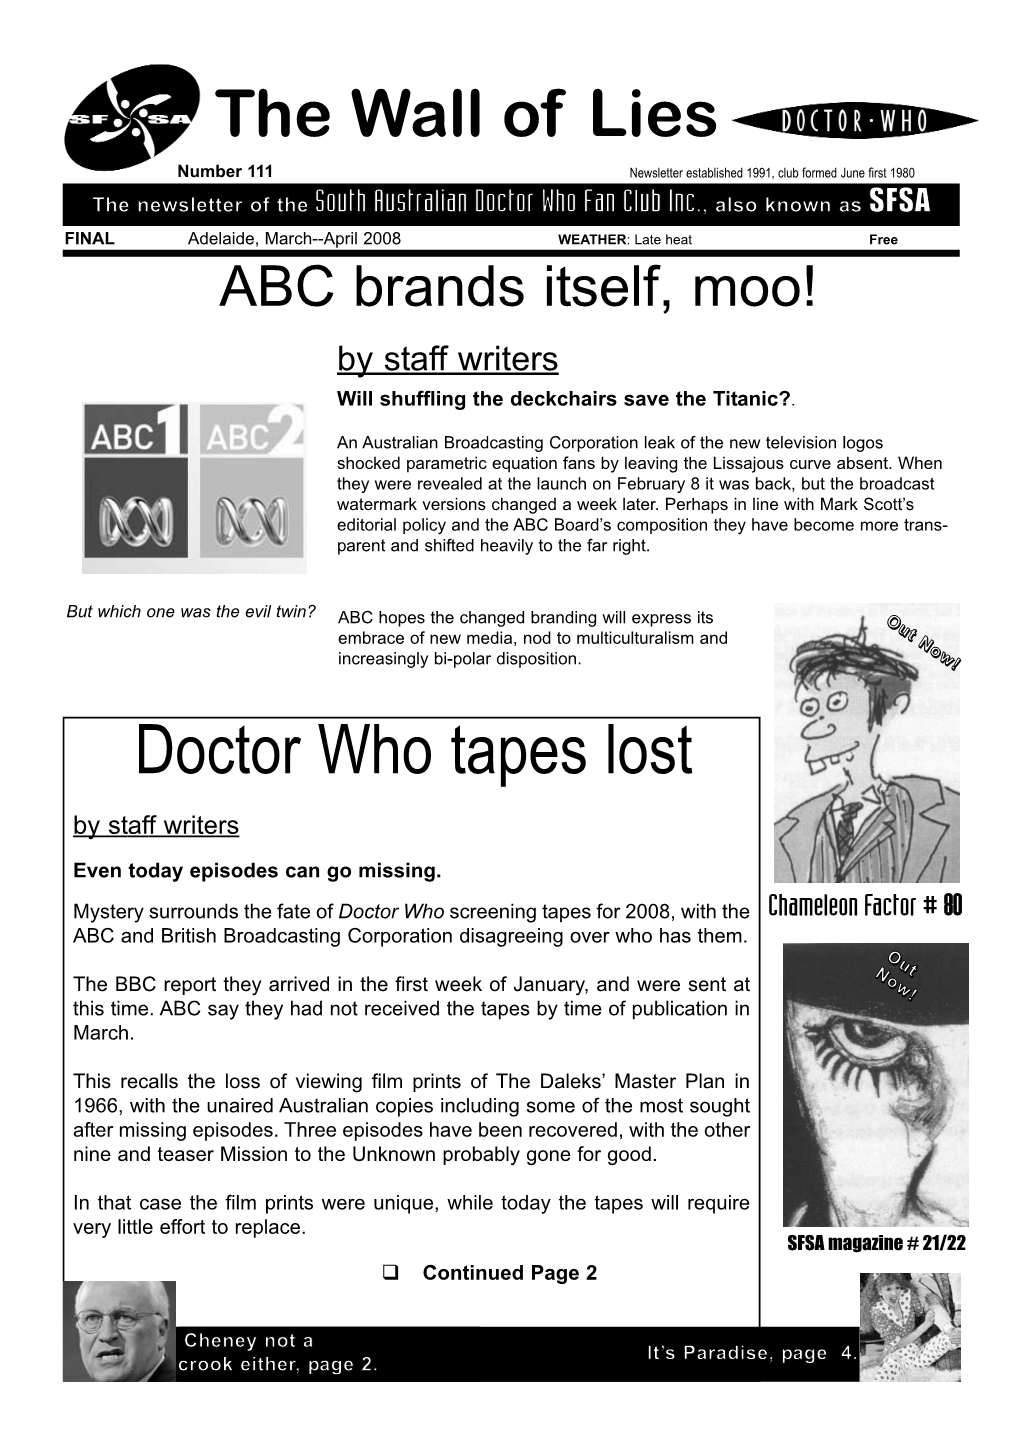 Doctor Who Tapes Lost